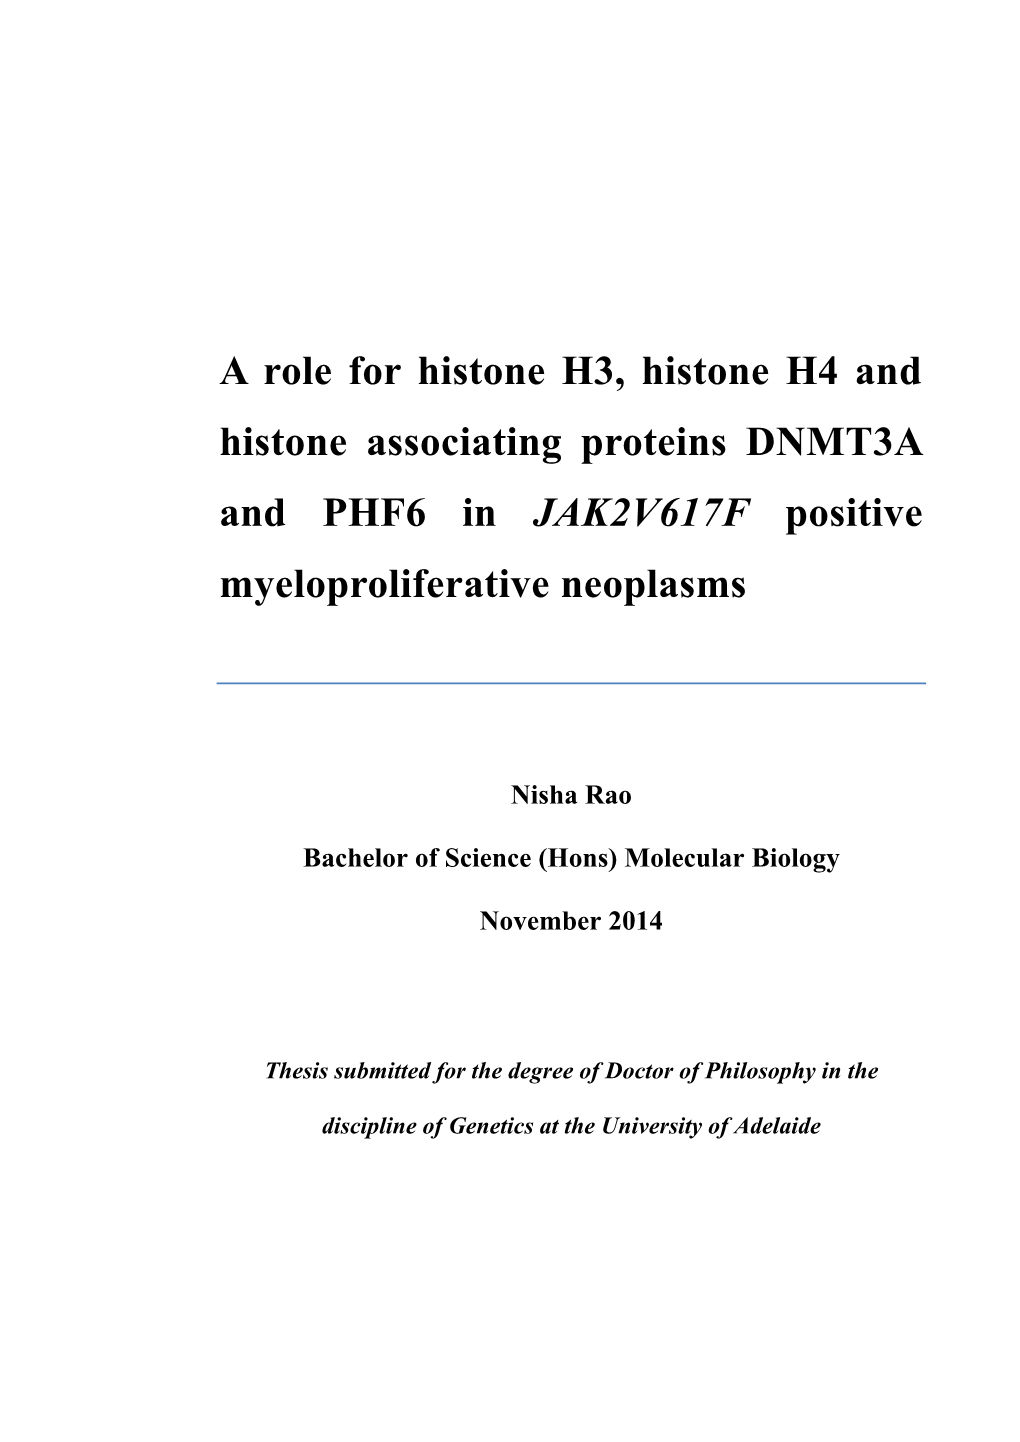 A Role for Histone H3, Histone H4 and Histone Associating Proteins DNMT3A and PHF6 in JAK2V617F Positive Myeloproliferative Neoplasms